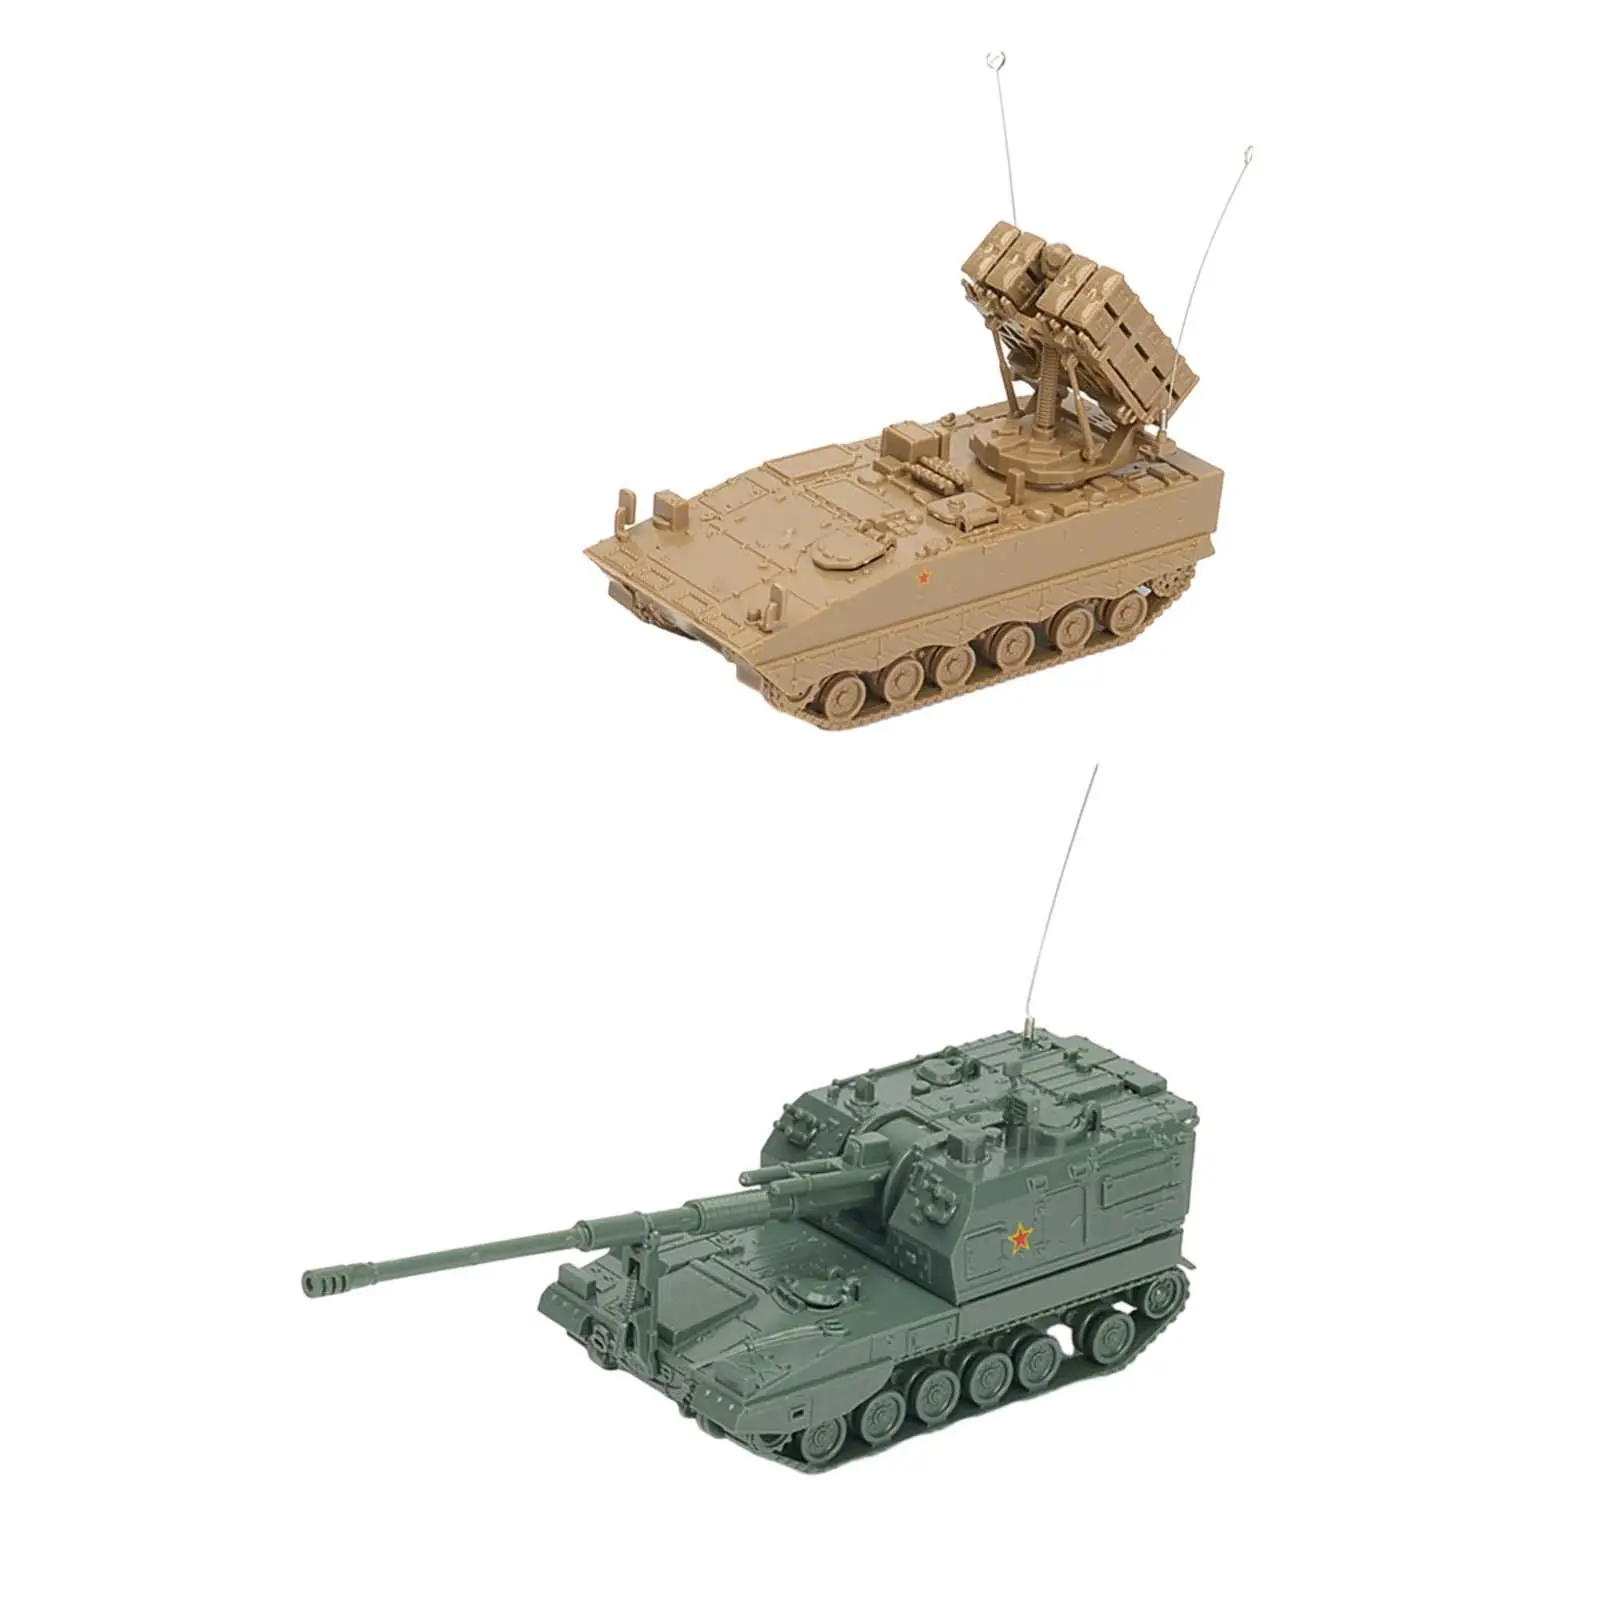 1:72 Scale Building Model Kits Education Toy DIY Assemble Armored Tank Model for Kids Display Children Party Favors Collection